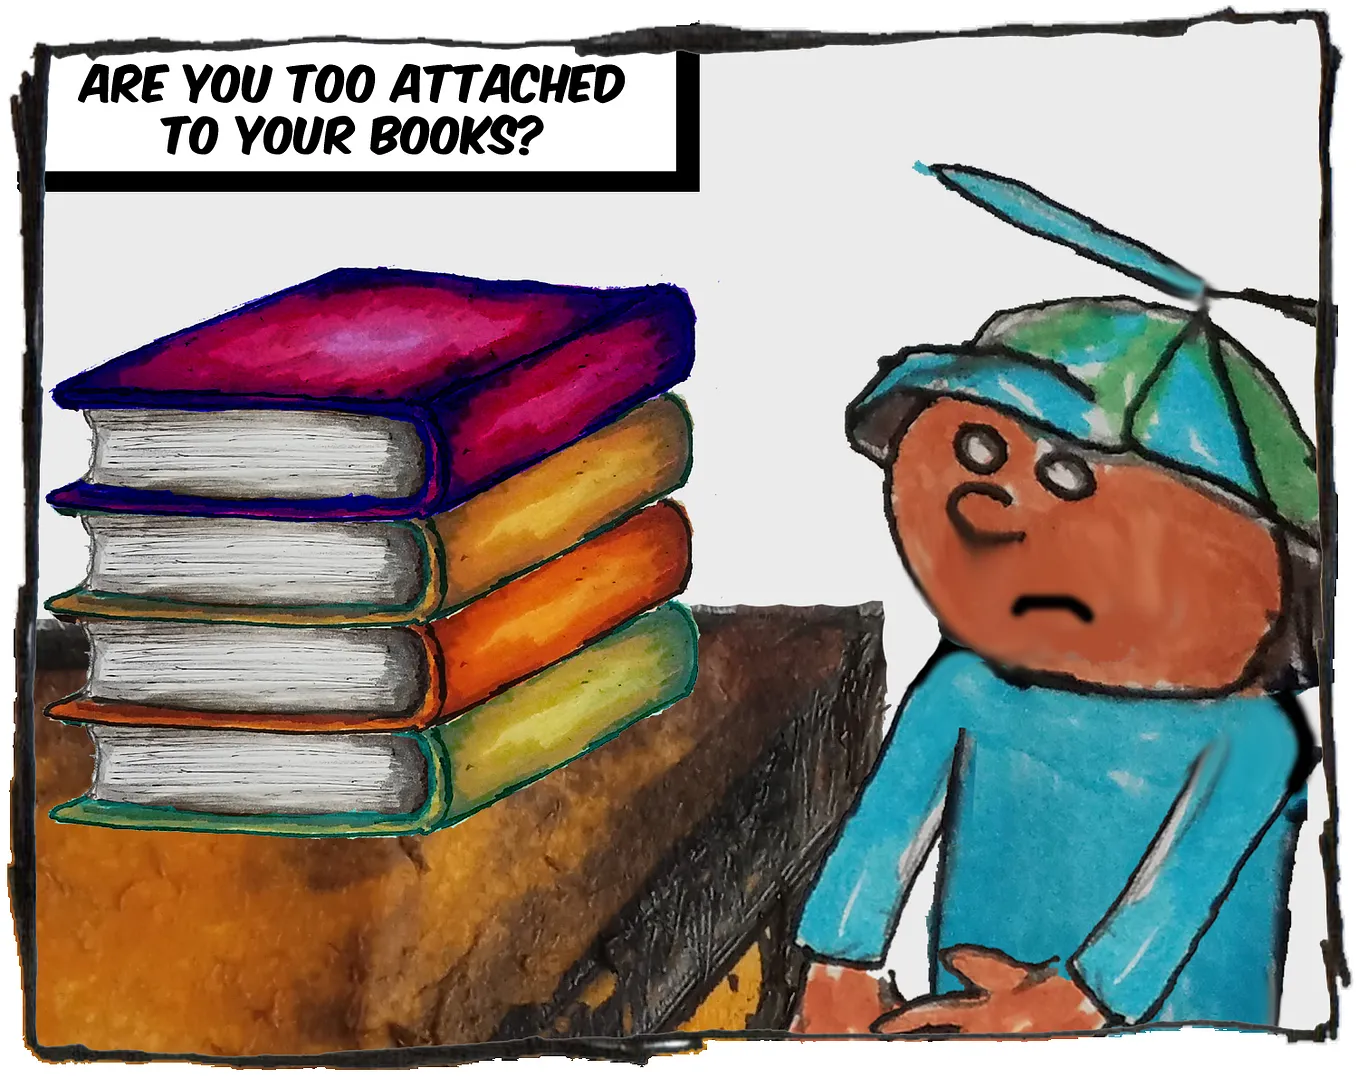 The caption states, “Are you too attached to your books.” It’s a cartoon image of a boy wearing a propeller hat looking at a stack of books on a desk.